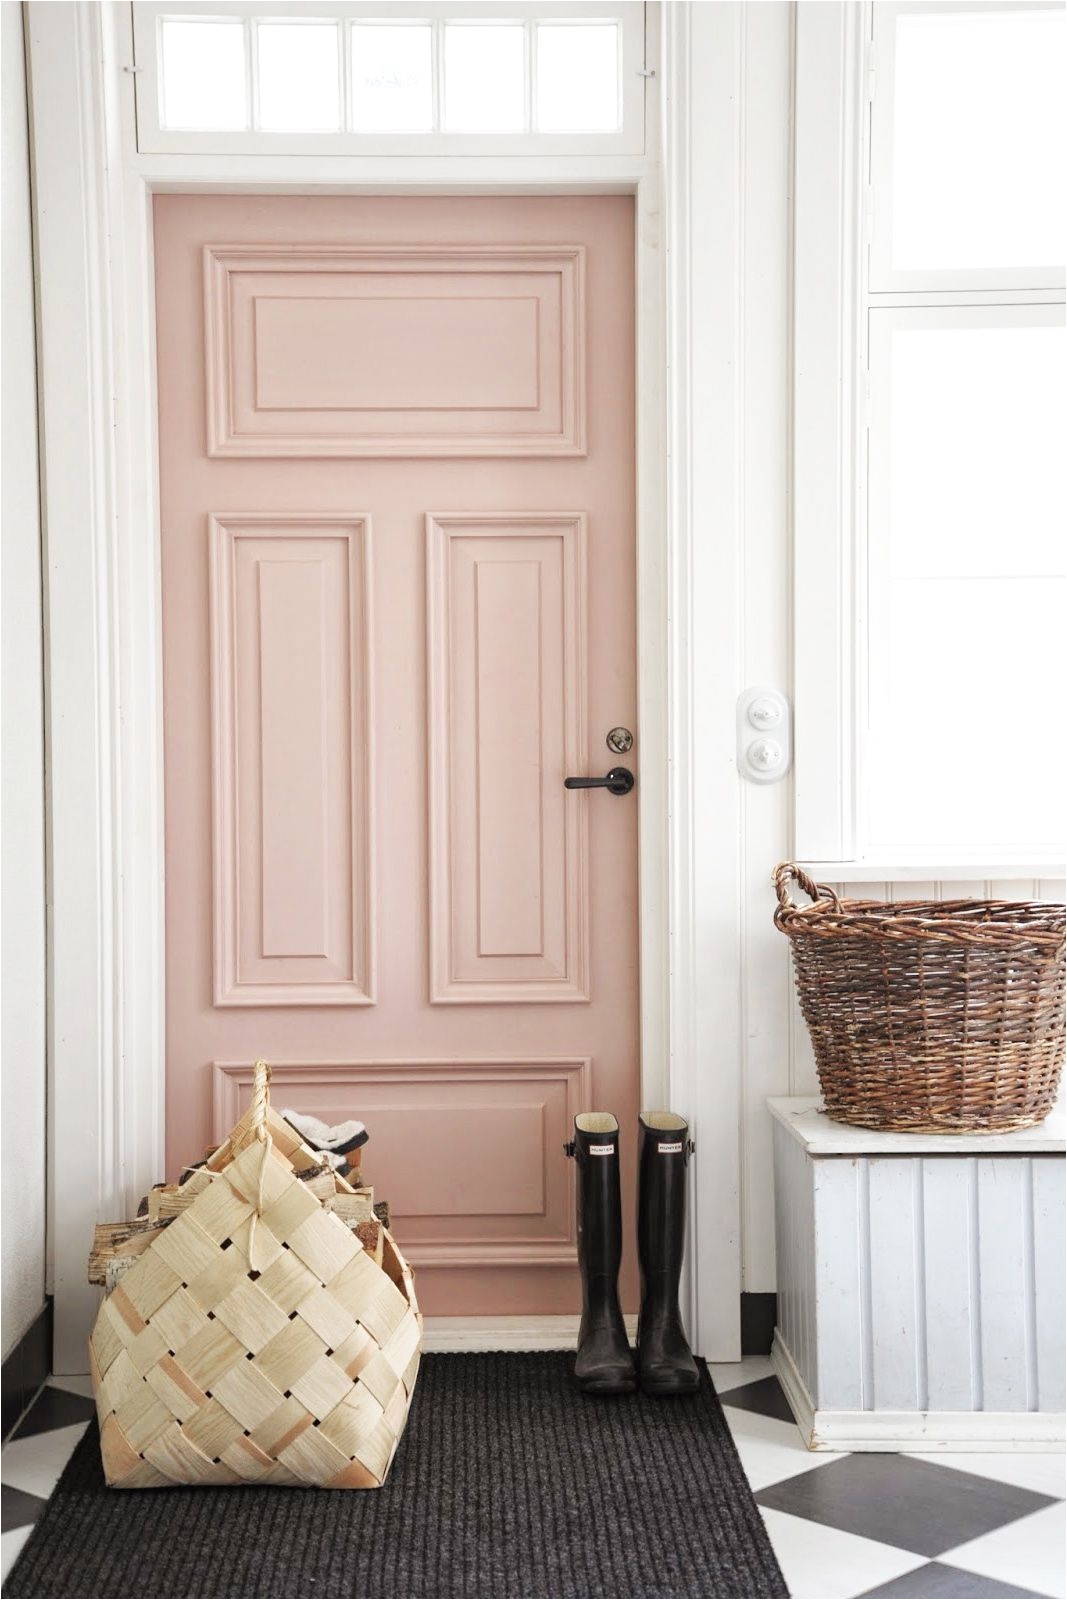 rose door inside home with tiled black and white floors